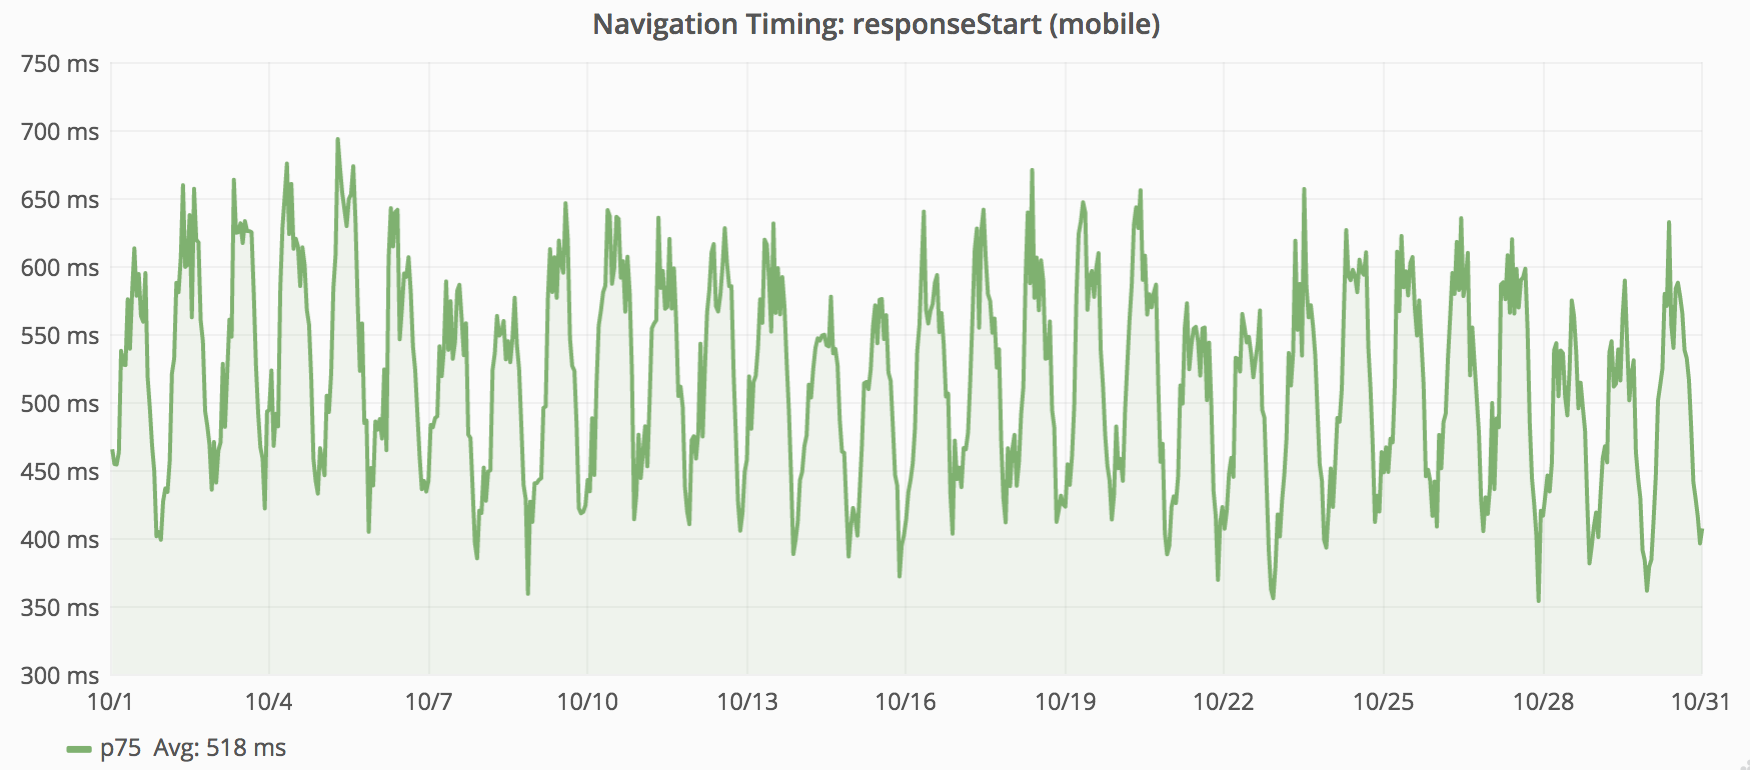 Line graph for responseStart metric from mobile pageviews. Values range from 350ms to 700ms. Averaging around 520ms.